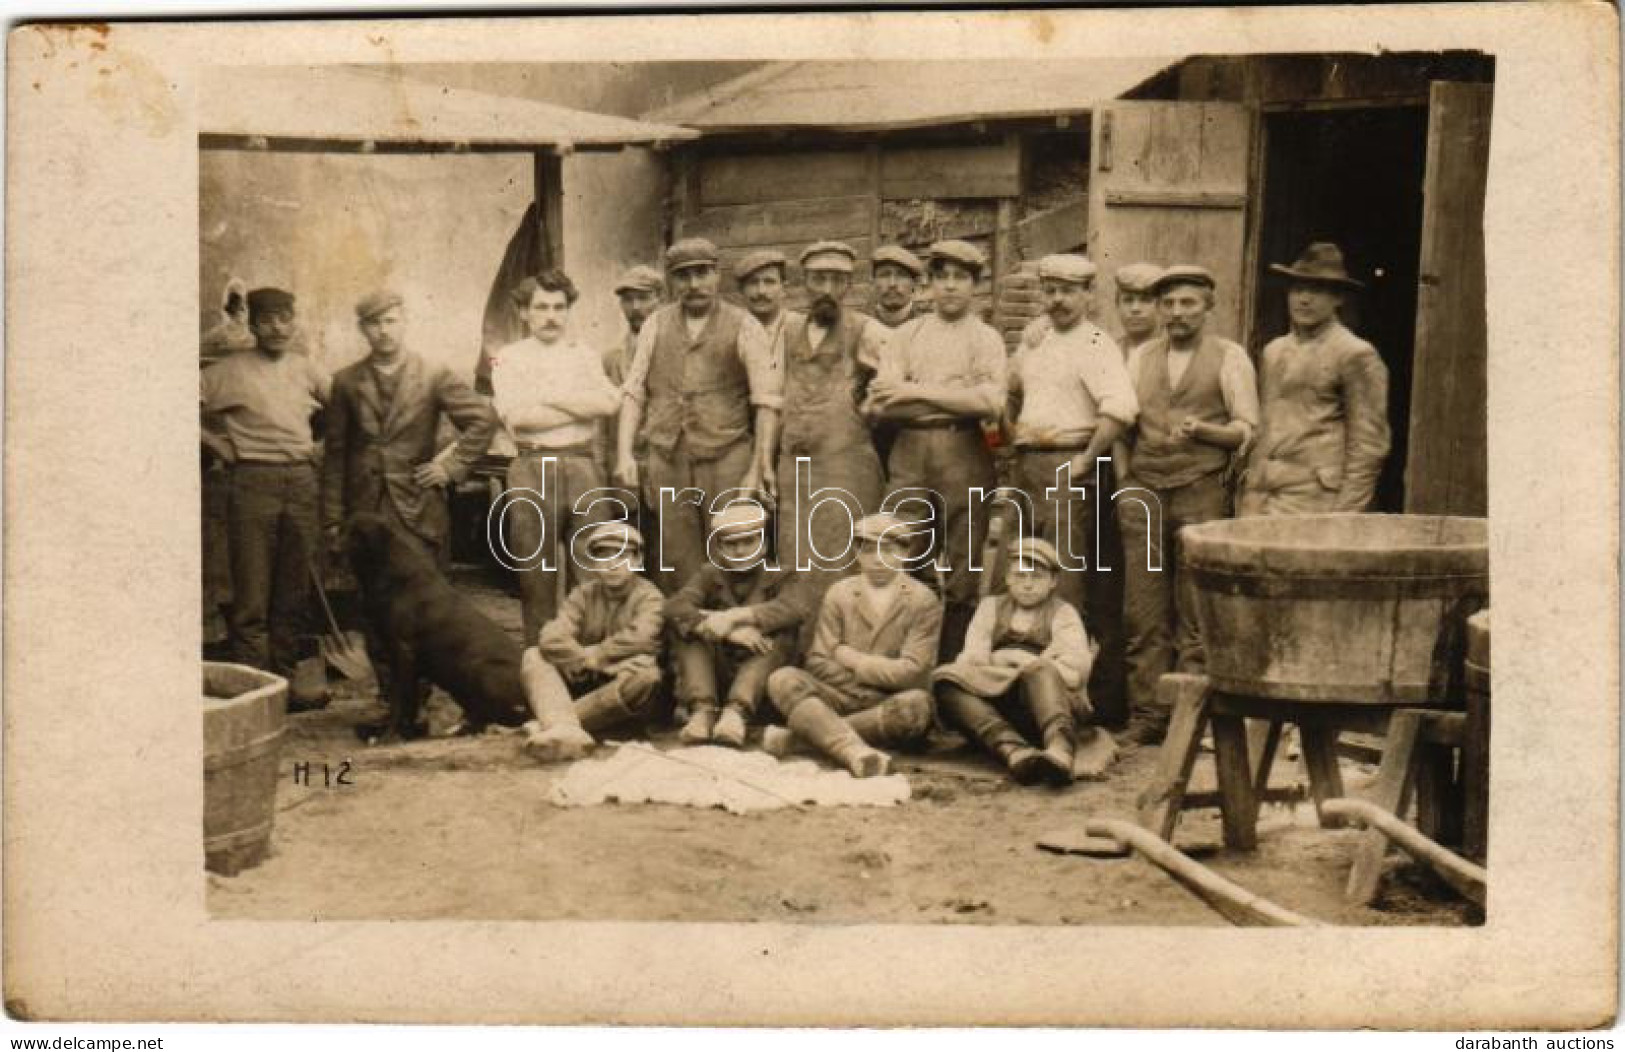 T3 1909 Praha, Prag; Workers Group Photo (fa) - Unclassified